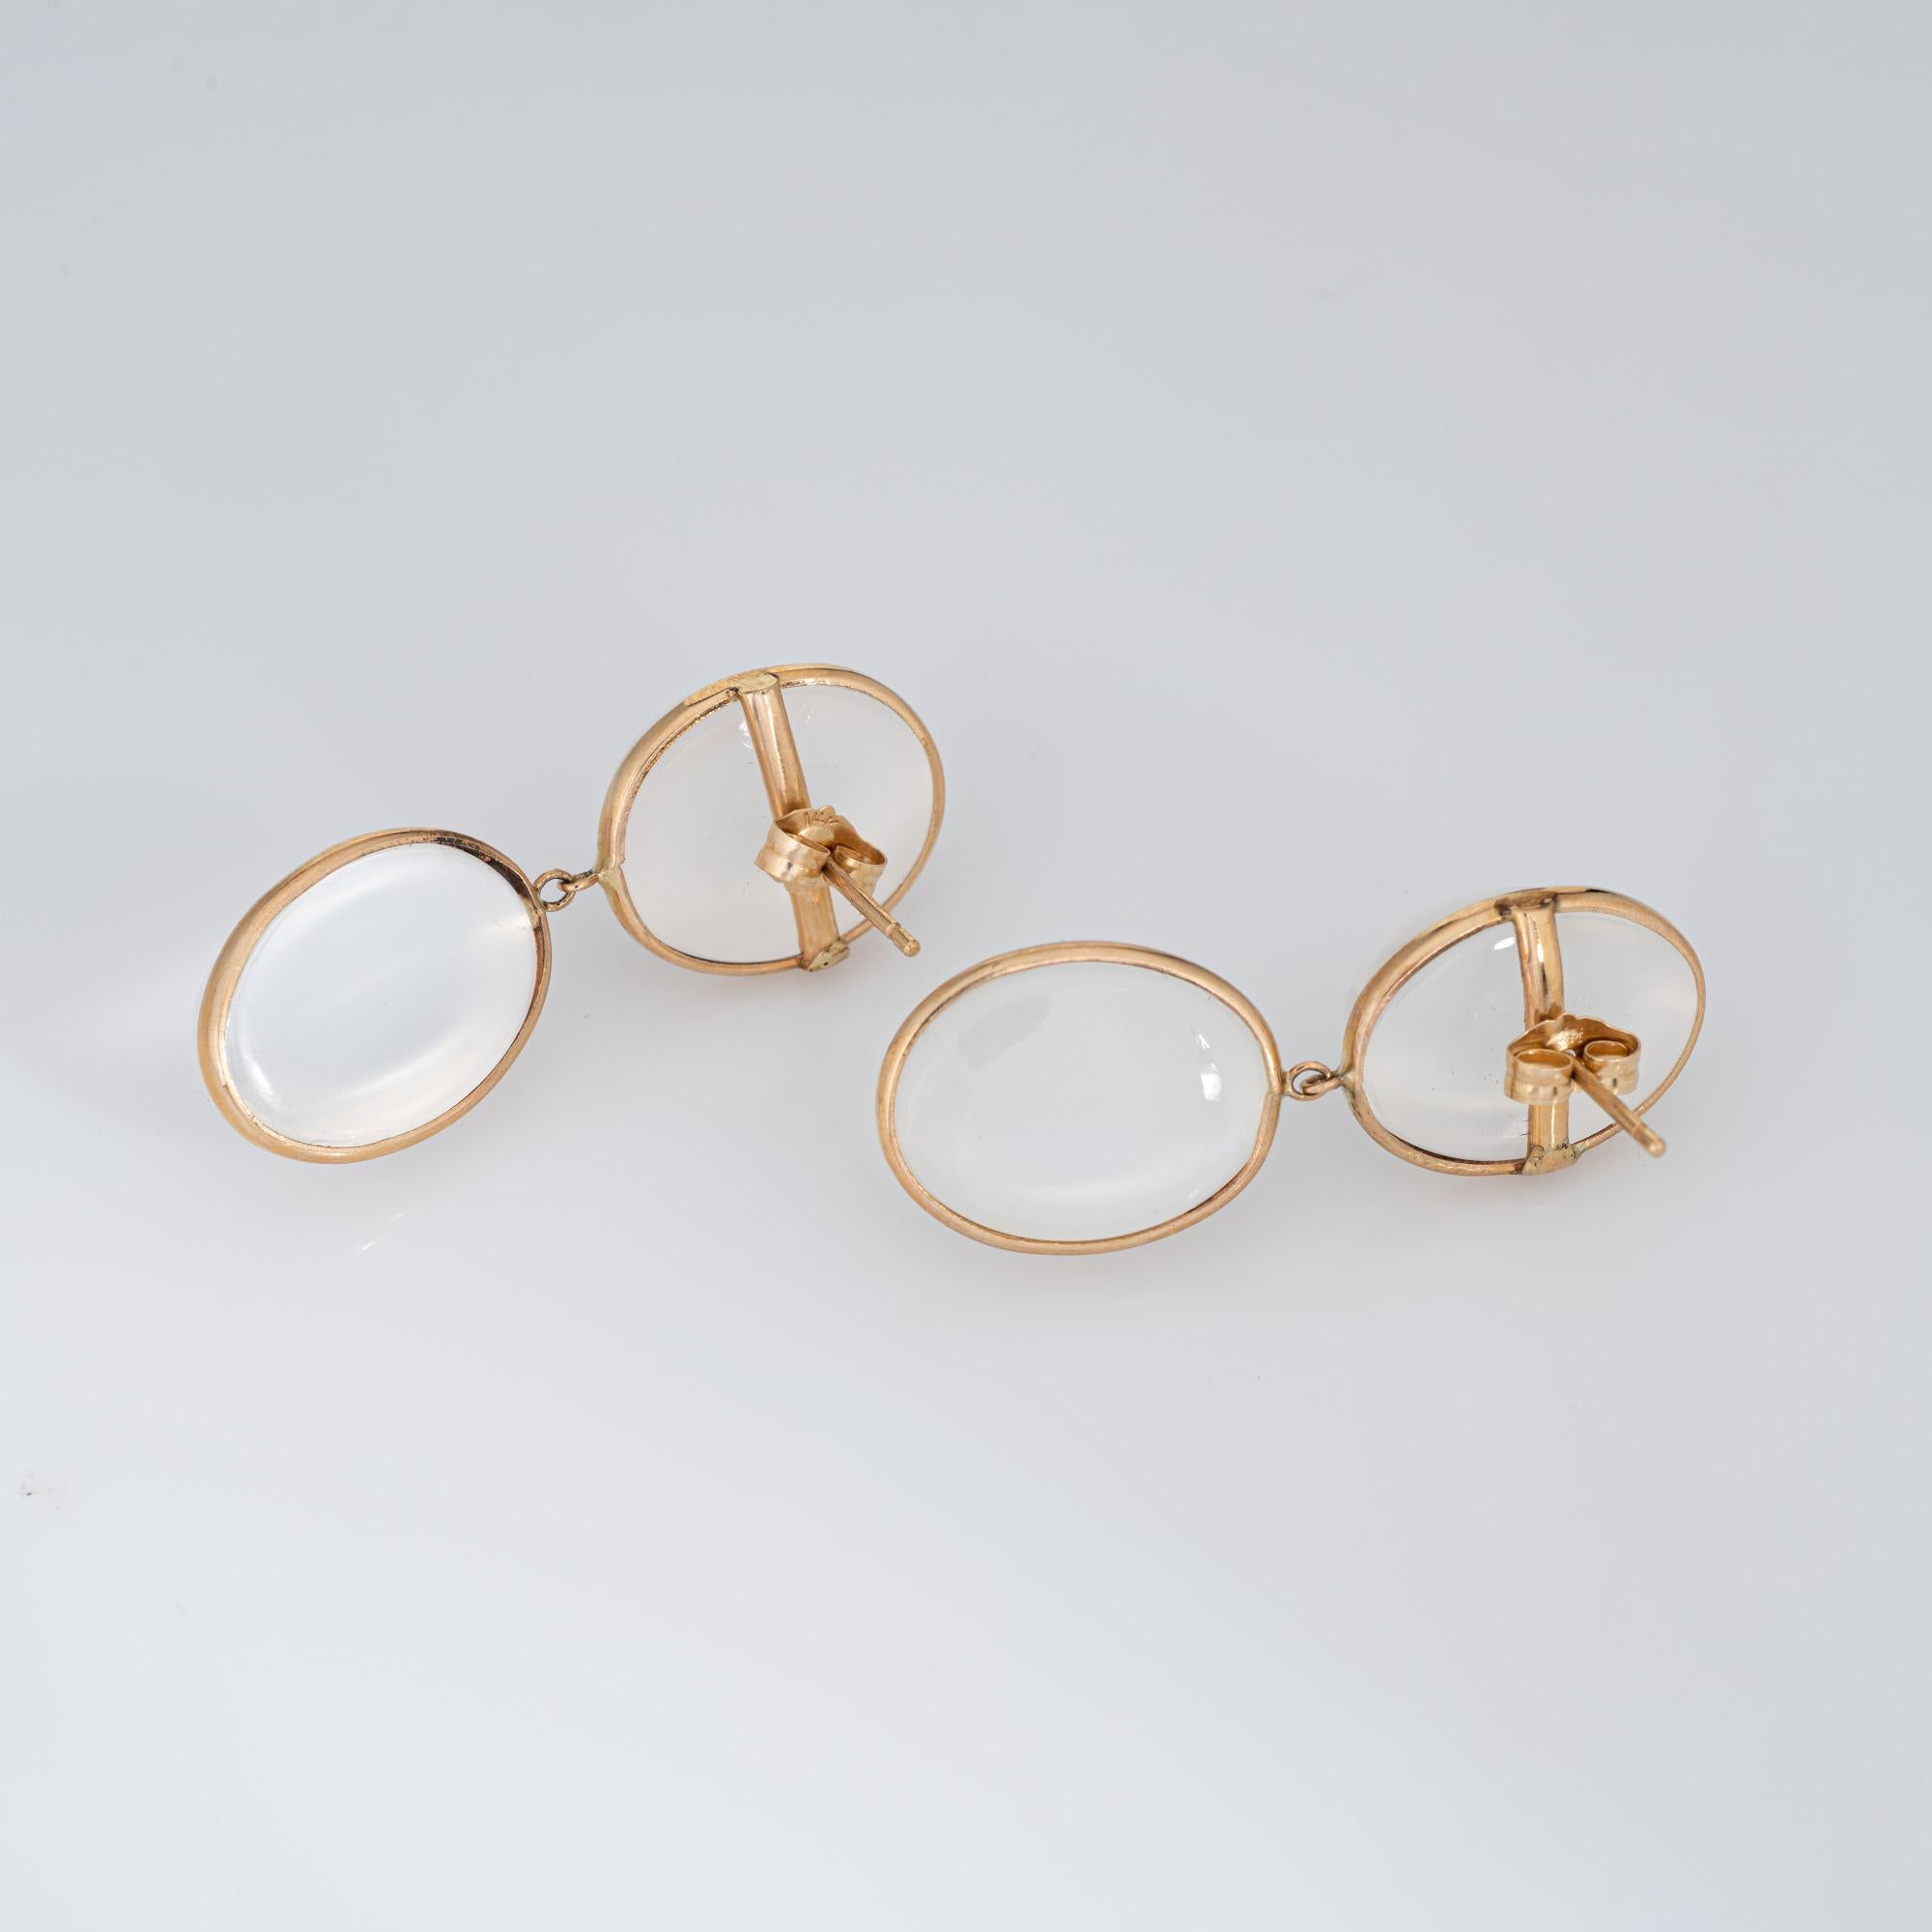 Elegant pair of moonstone drop earrings crafted in 14k yellow gold. 

Cabochon cut moonstone is estimated at 8 carats each and total an estimated 32 carats. The moonstones are in very good condition and free of cracks or chips.
The stylish earrings